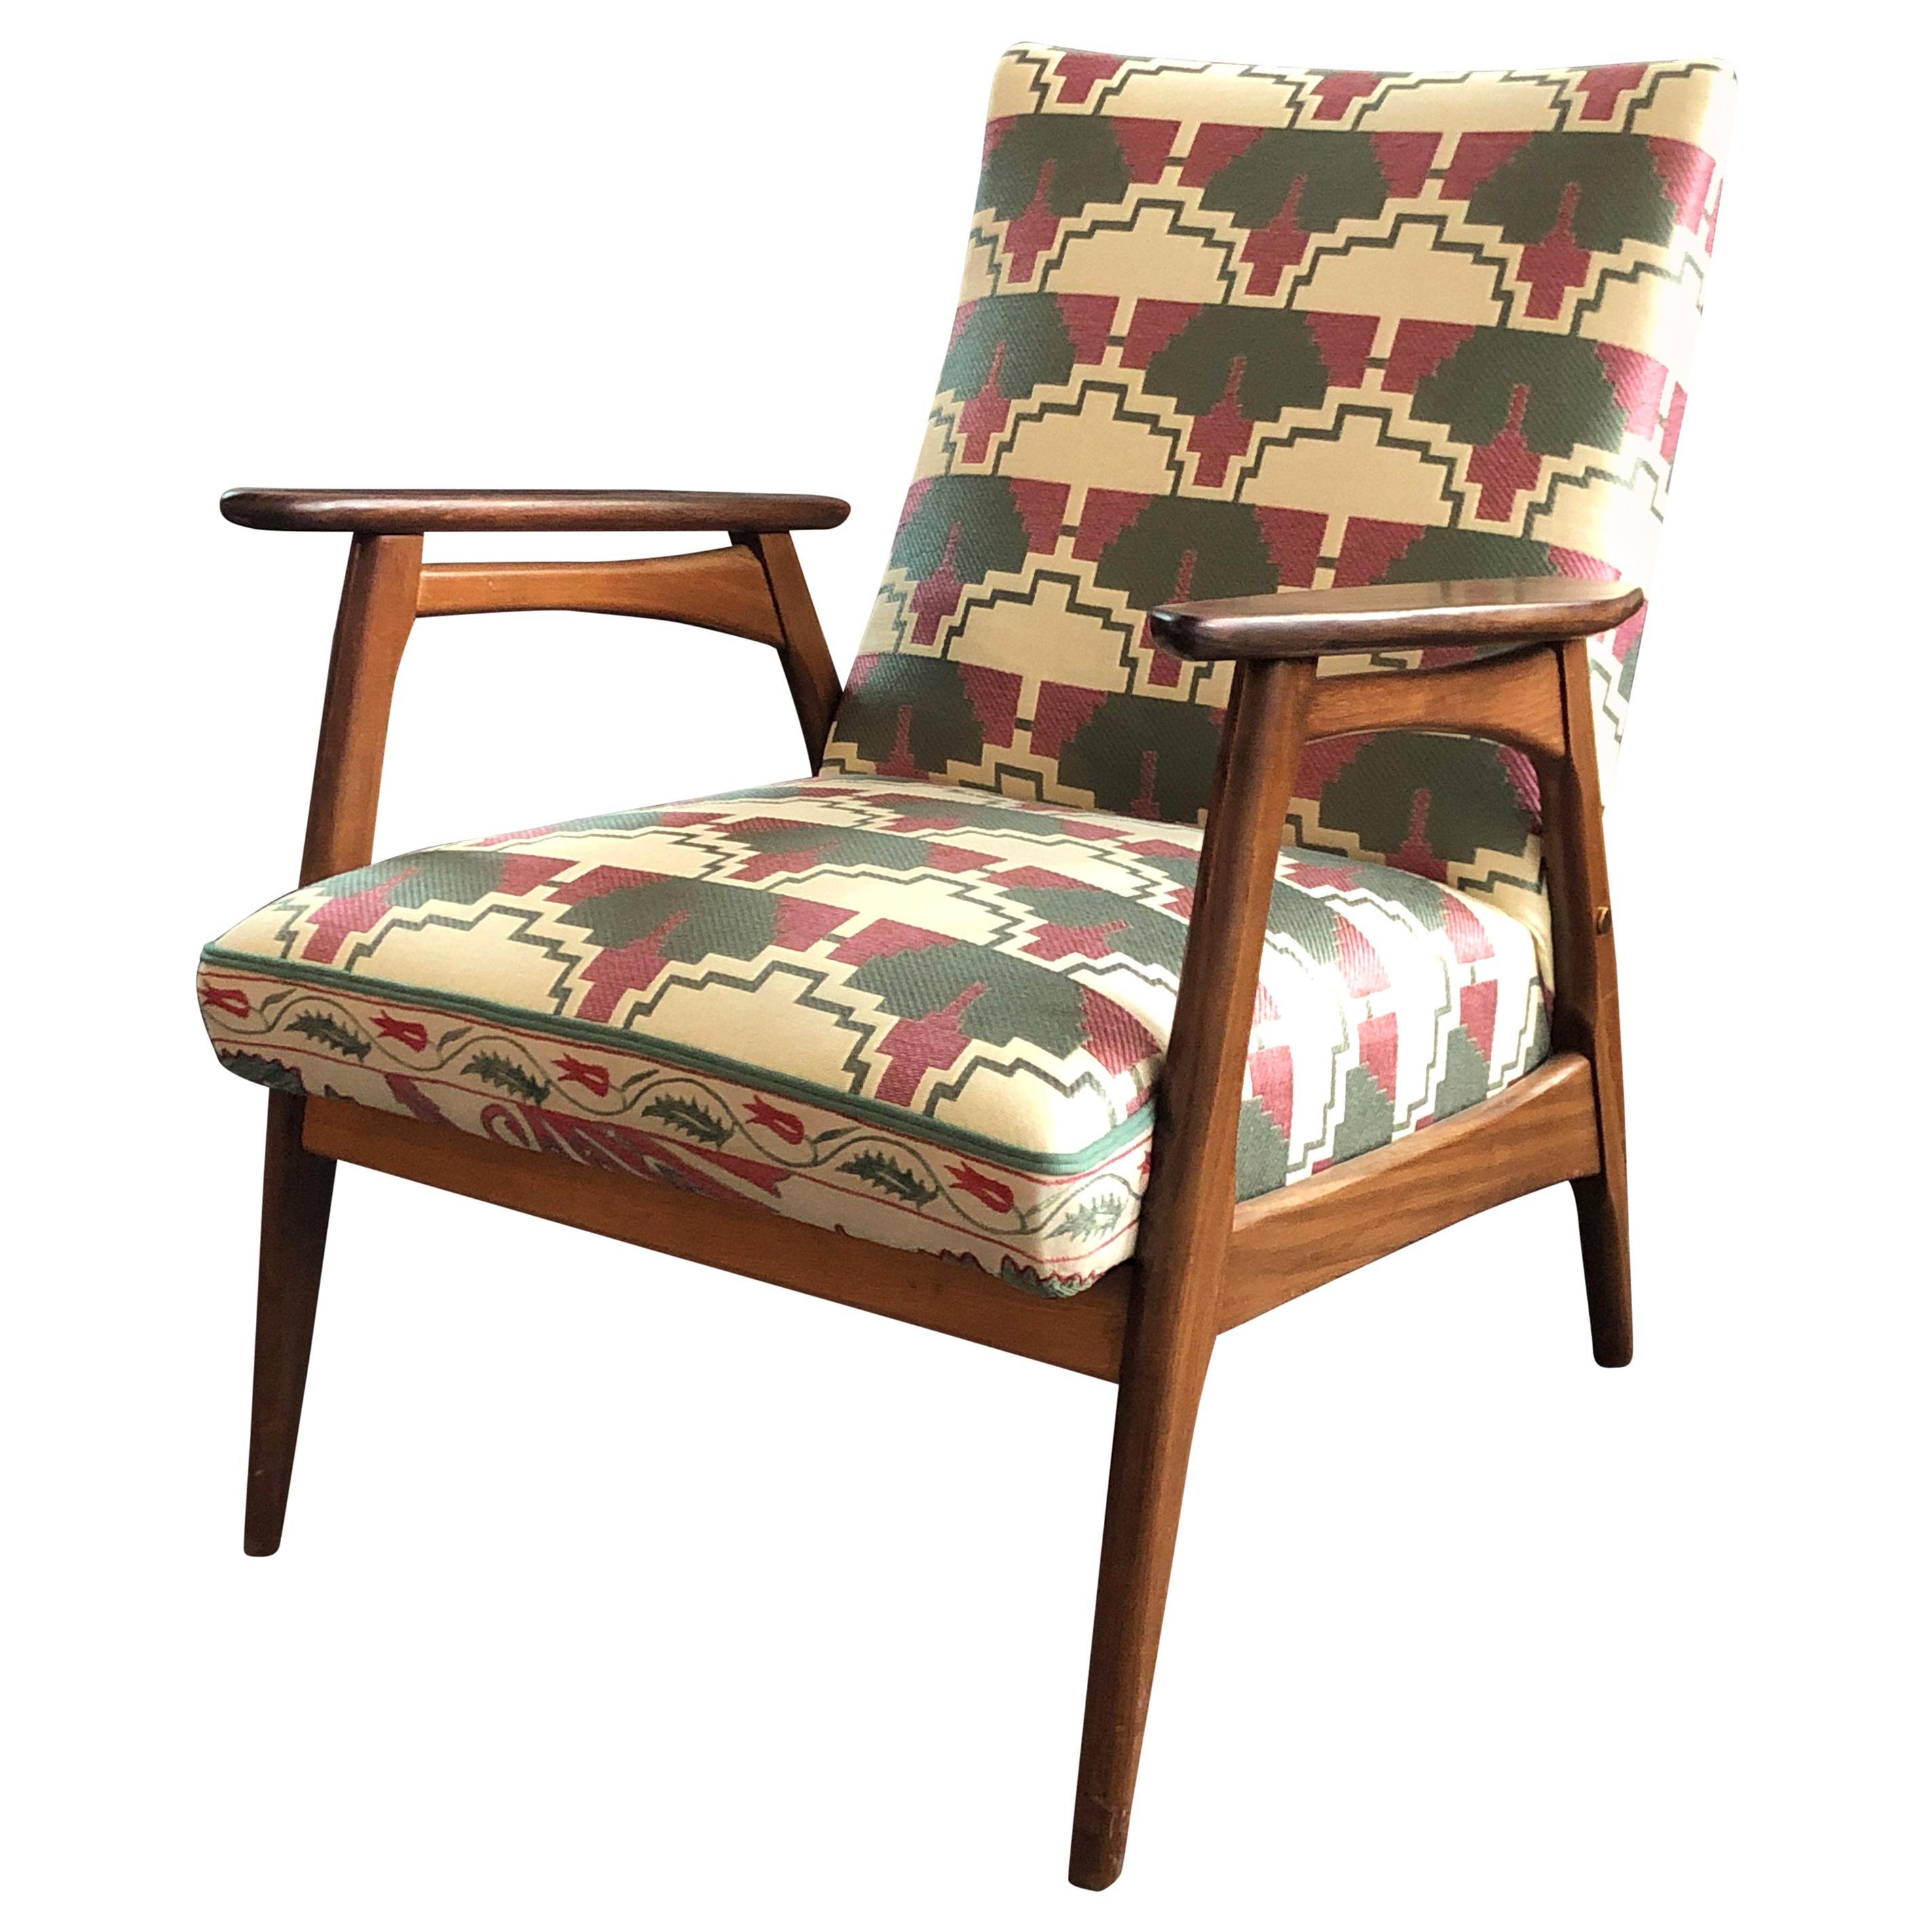 1960s Chair from Teak Wood with Pierre Frey Fabric For Sale